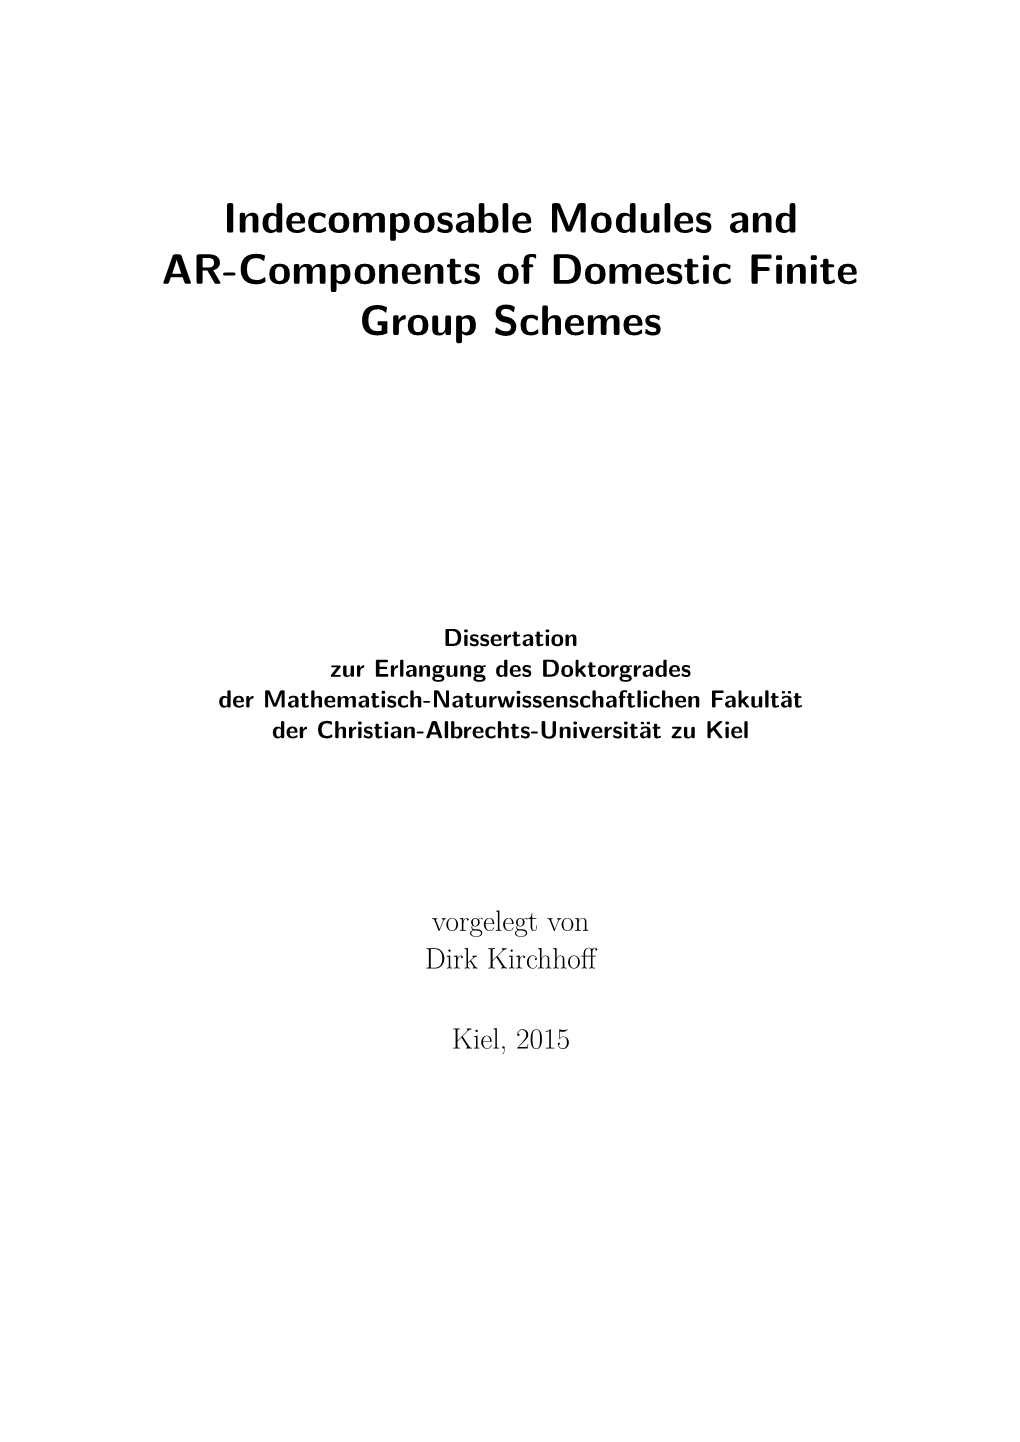 Indecomposable Modules and AR-Components of Domestic Finite Group Schemes